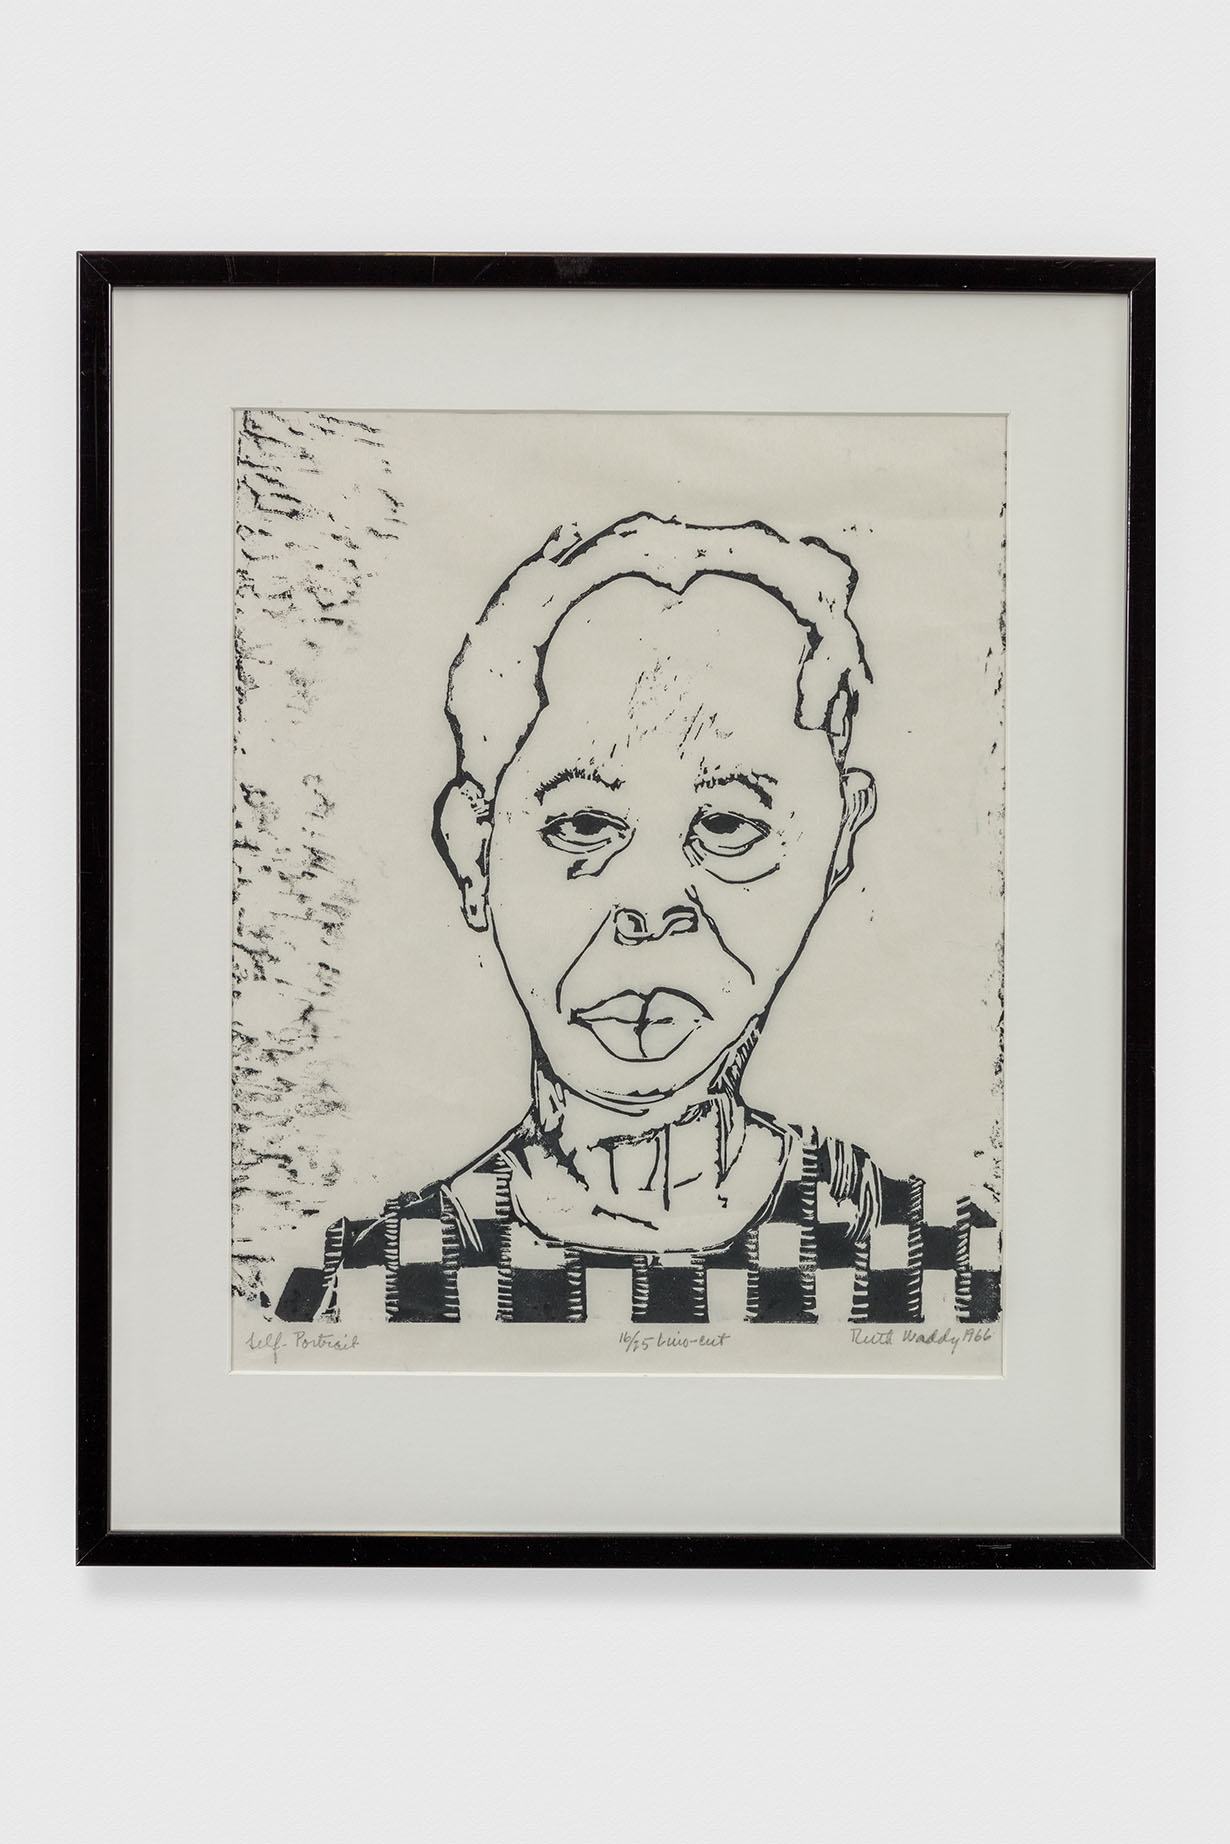 Ruth Waddy, Self Portrait, 1966. Lino-cut print. 23 x 19 3/4 in. © Ruth Waddy. Courtesy The Eileen Harris Norton Collection. Photo: Charles White.